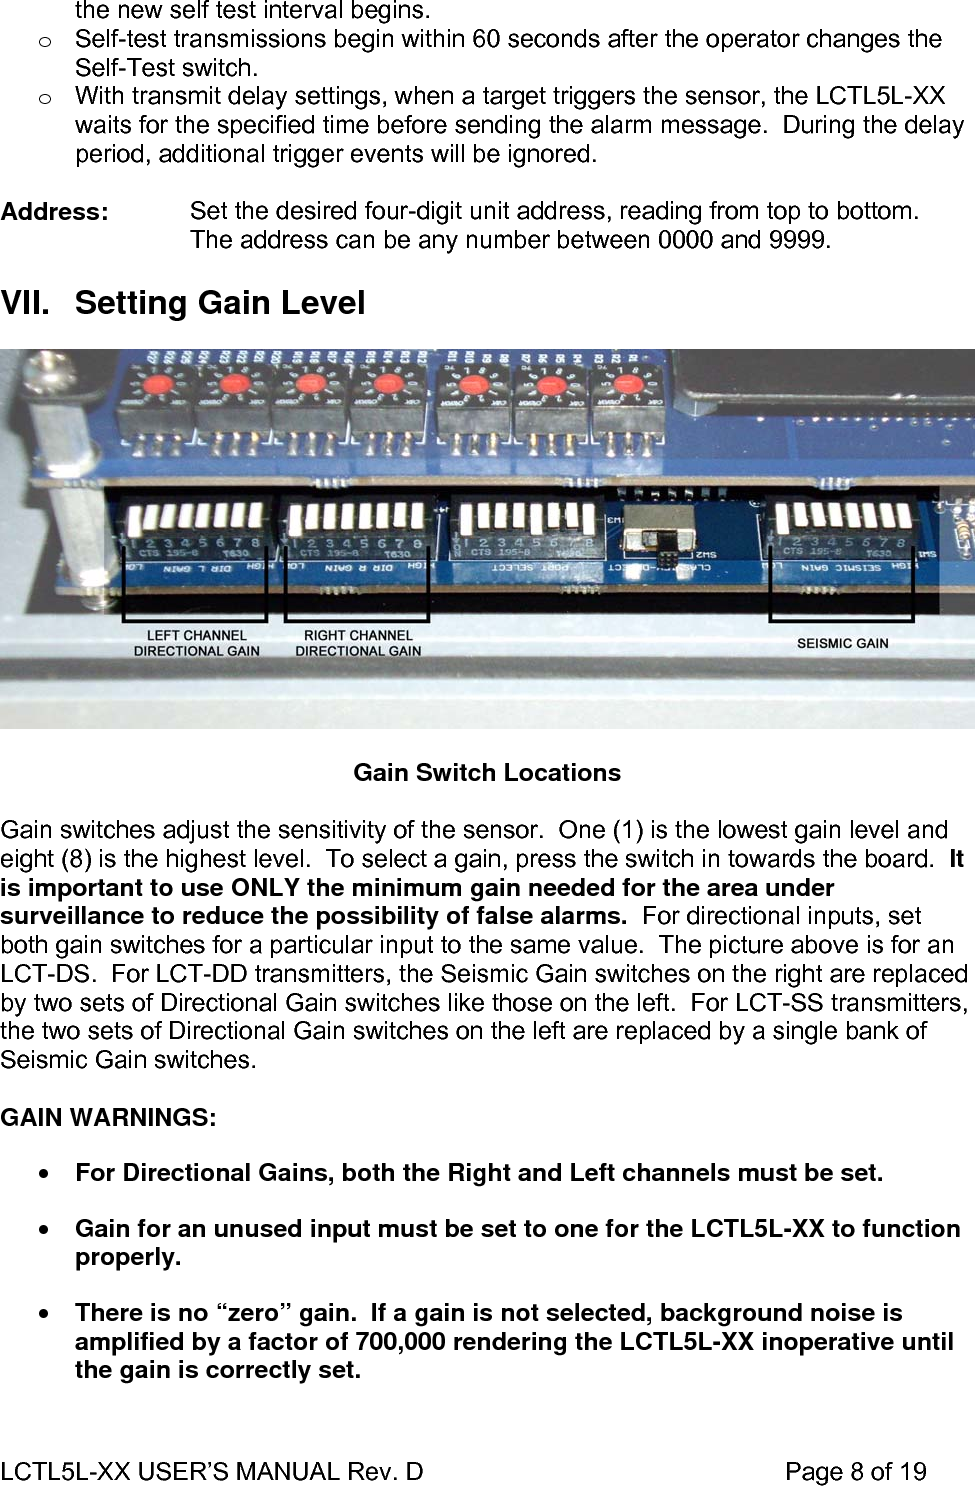 LCTL5L-XX USER’S MANUAL Rev. D                                                    Page 8 of 19  the new self test interval begins. o  Self-test transmissions begin within 60 seconds after the operator changes the Self-Test switch. o  With transmit delay settings, when a target triggers the sensor, the LCTL5L-XX waits for the specified time before sending the alarm message.  During the delay period, additional trigger events will be ignored.  Address:  Set the desired four-digit unit address, reading from top to bottom. The address can be any number between 0000 and 9999.  VII.  Setting Gain Level    Gain Switch Locations  Gain switches adjust the sensitivity of the sensor.  One (1) is the lowest gain level and eight (8) is the highest level.  To select a gain, press the switch in towards the board.  It is important to use ONLY the minimum gain needed for the area under surveillance to reduce the possibility of false alarms.  For directional inputs, set both gain switches for a particular input to the same value.  The picture above is for an LCT-DS.  For LCT-DD transmitters, the Seismic Gain switches on the right are replaced by two sets of Directional Gain switches like those on the left.  For LCT-SS transmitters, the two sets of Directional Gain switches on the left are replaced by a single bank of Seismic Gain switches.  GAIN WARNINGS: • For Directional Gains, both the Right and Left channels must be set. • Gain for an unused input must be set to one for the LCTL5L-XX to function properly. • There is no “zero” gain.  If a gain is not selected, background noise is amplified by a factor of 700,000 rendering the LCTL5L-XX inoperative until the gain is correctly set.  